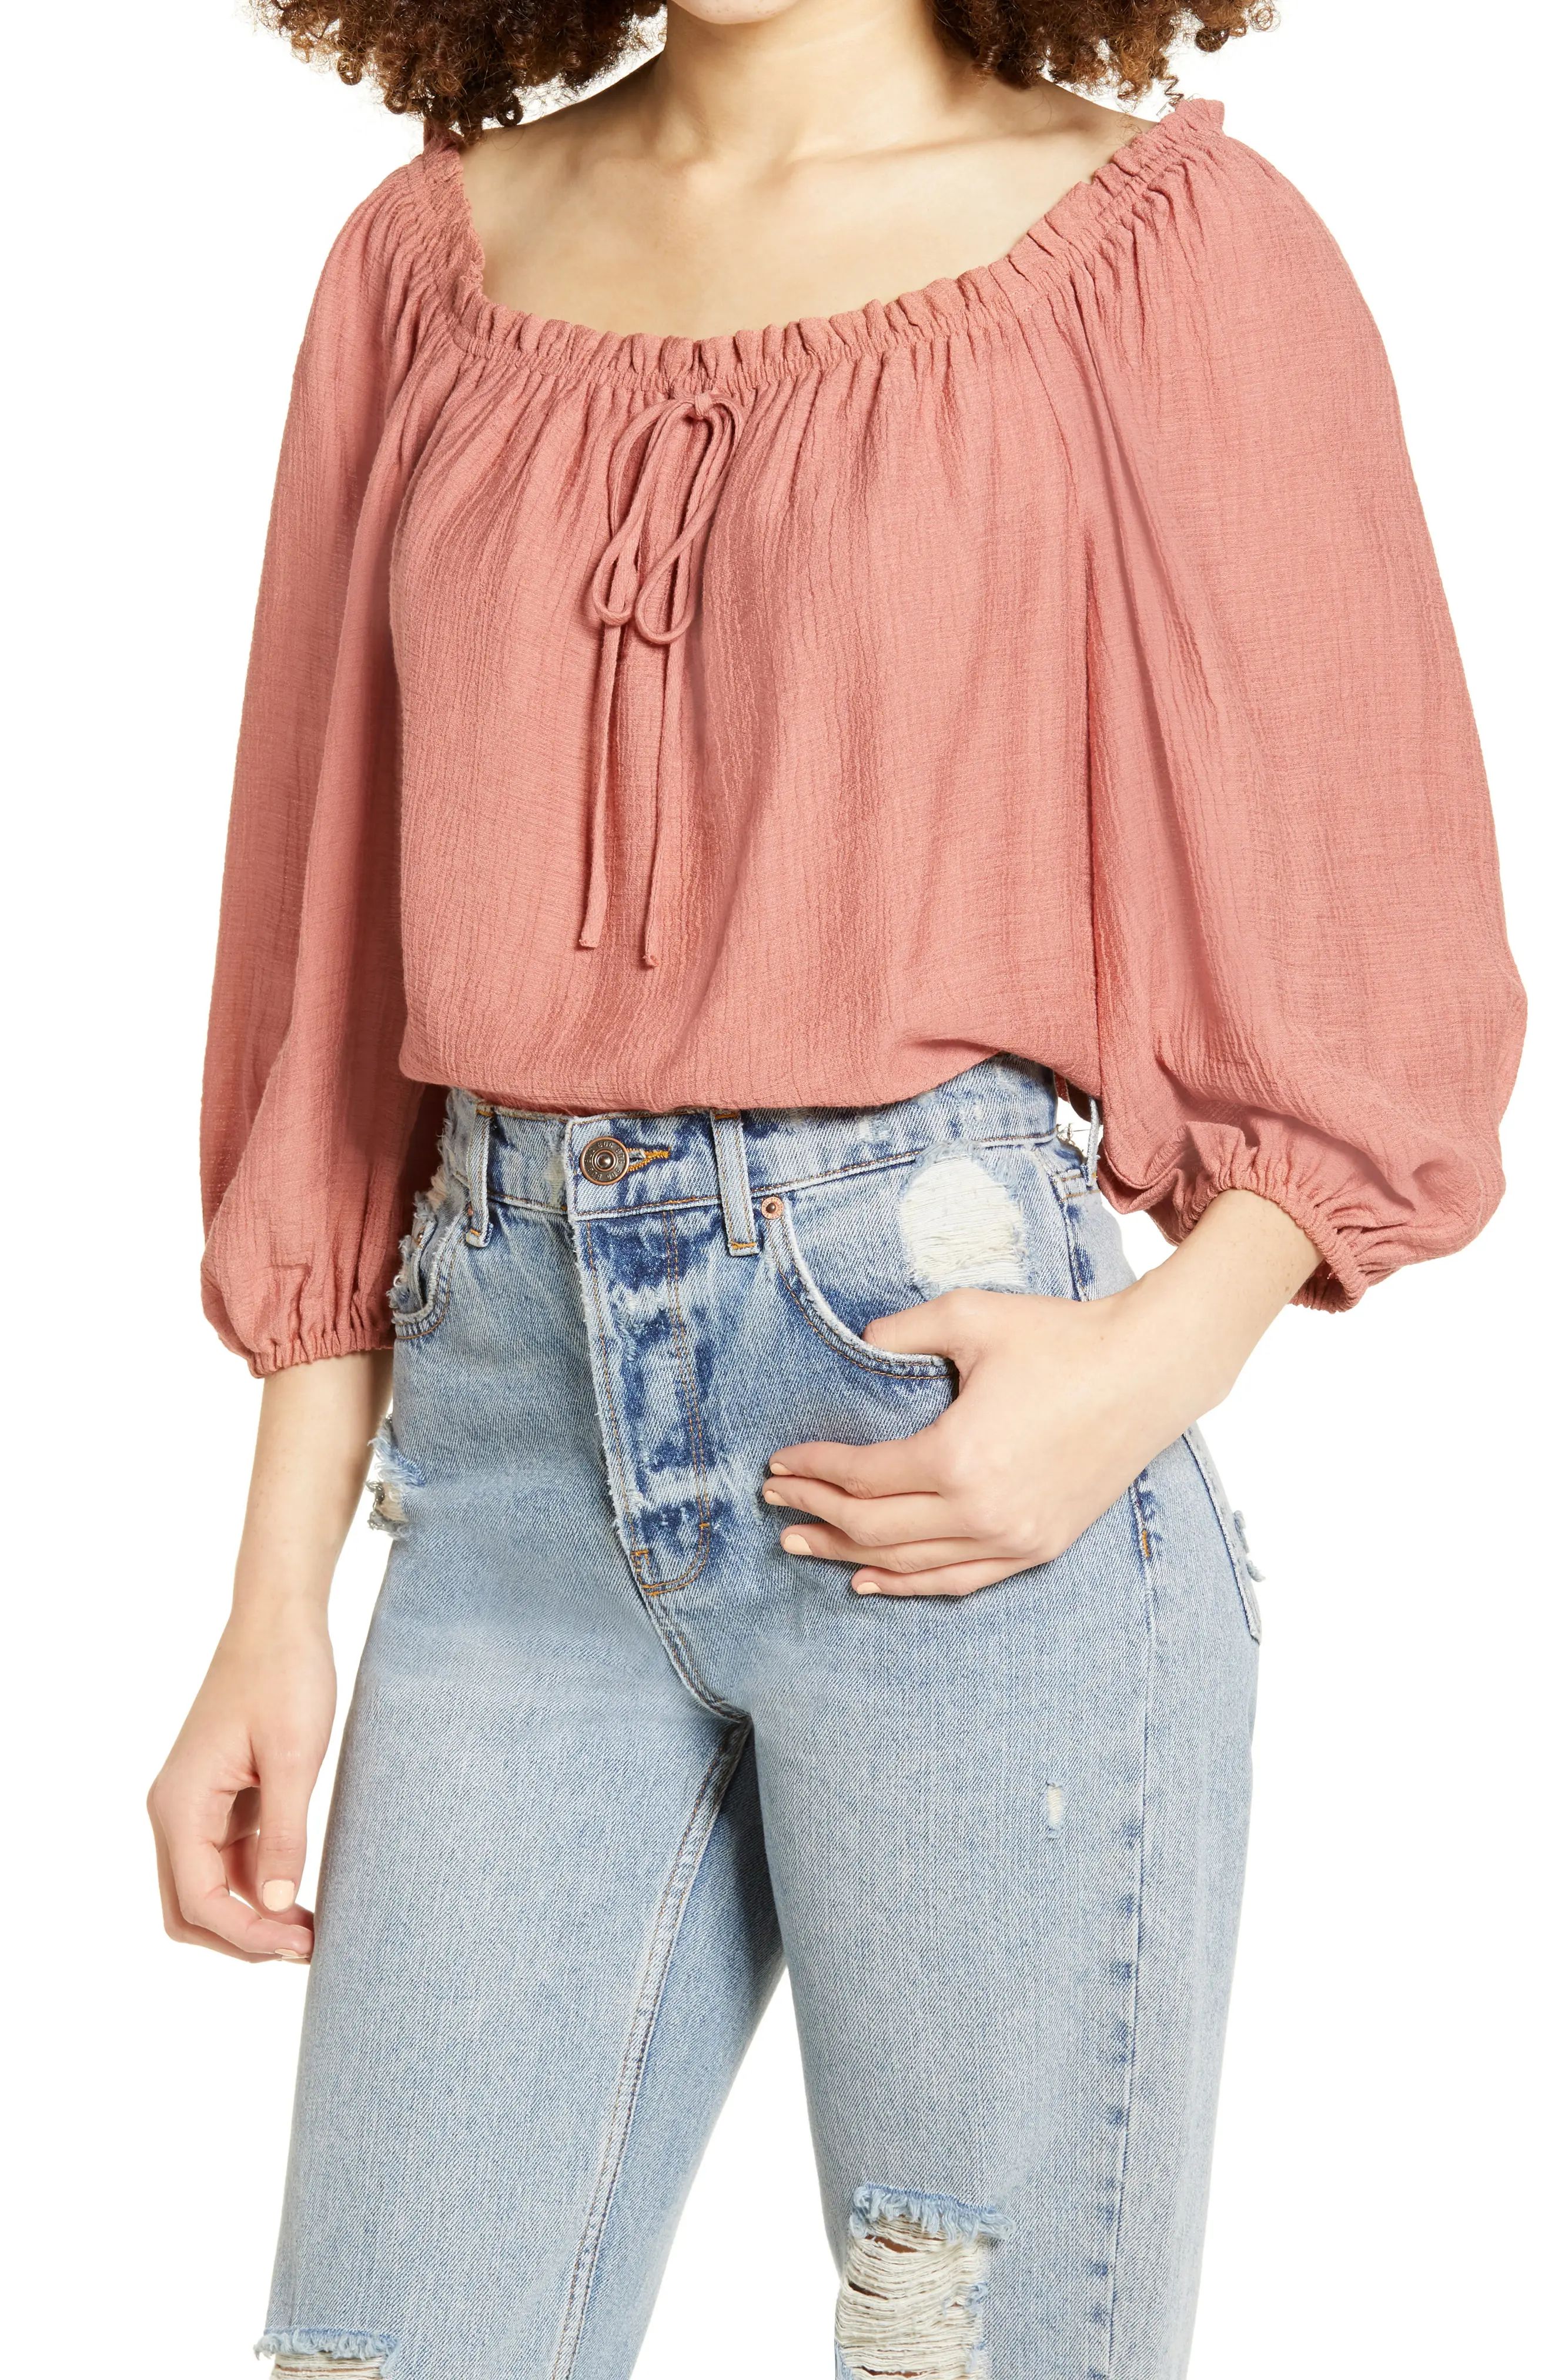 Women's All In Favor Tie Neck Peasant Top, Size Small - Coral | Nordstrom